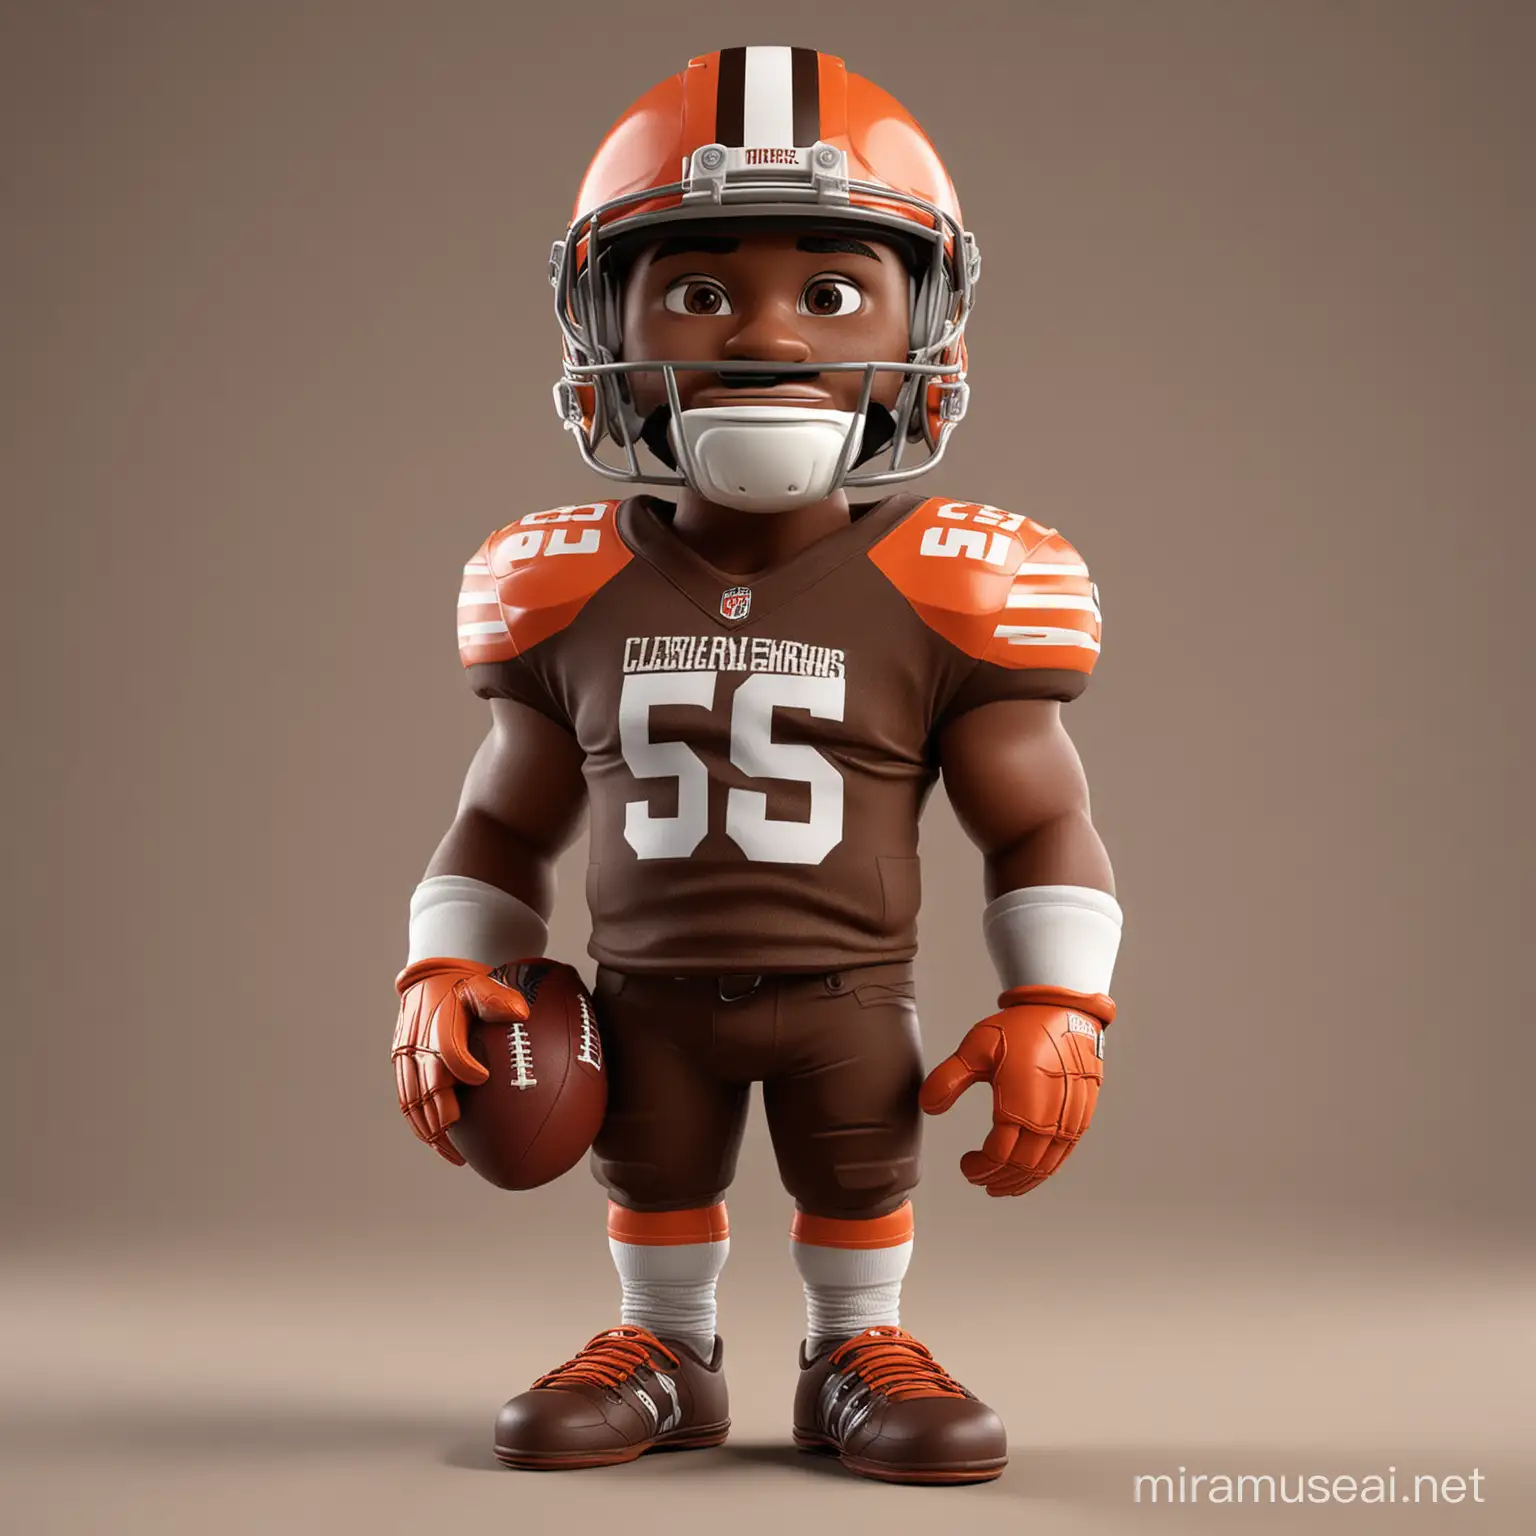 Cartoon Style 3D Rendered NFL Player in Cleveland Browns Gear Sanding Pose